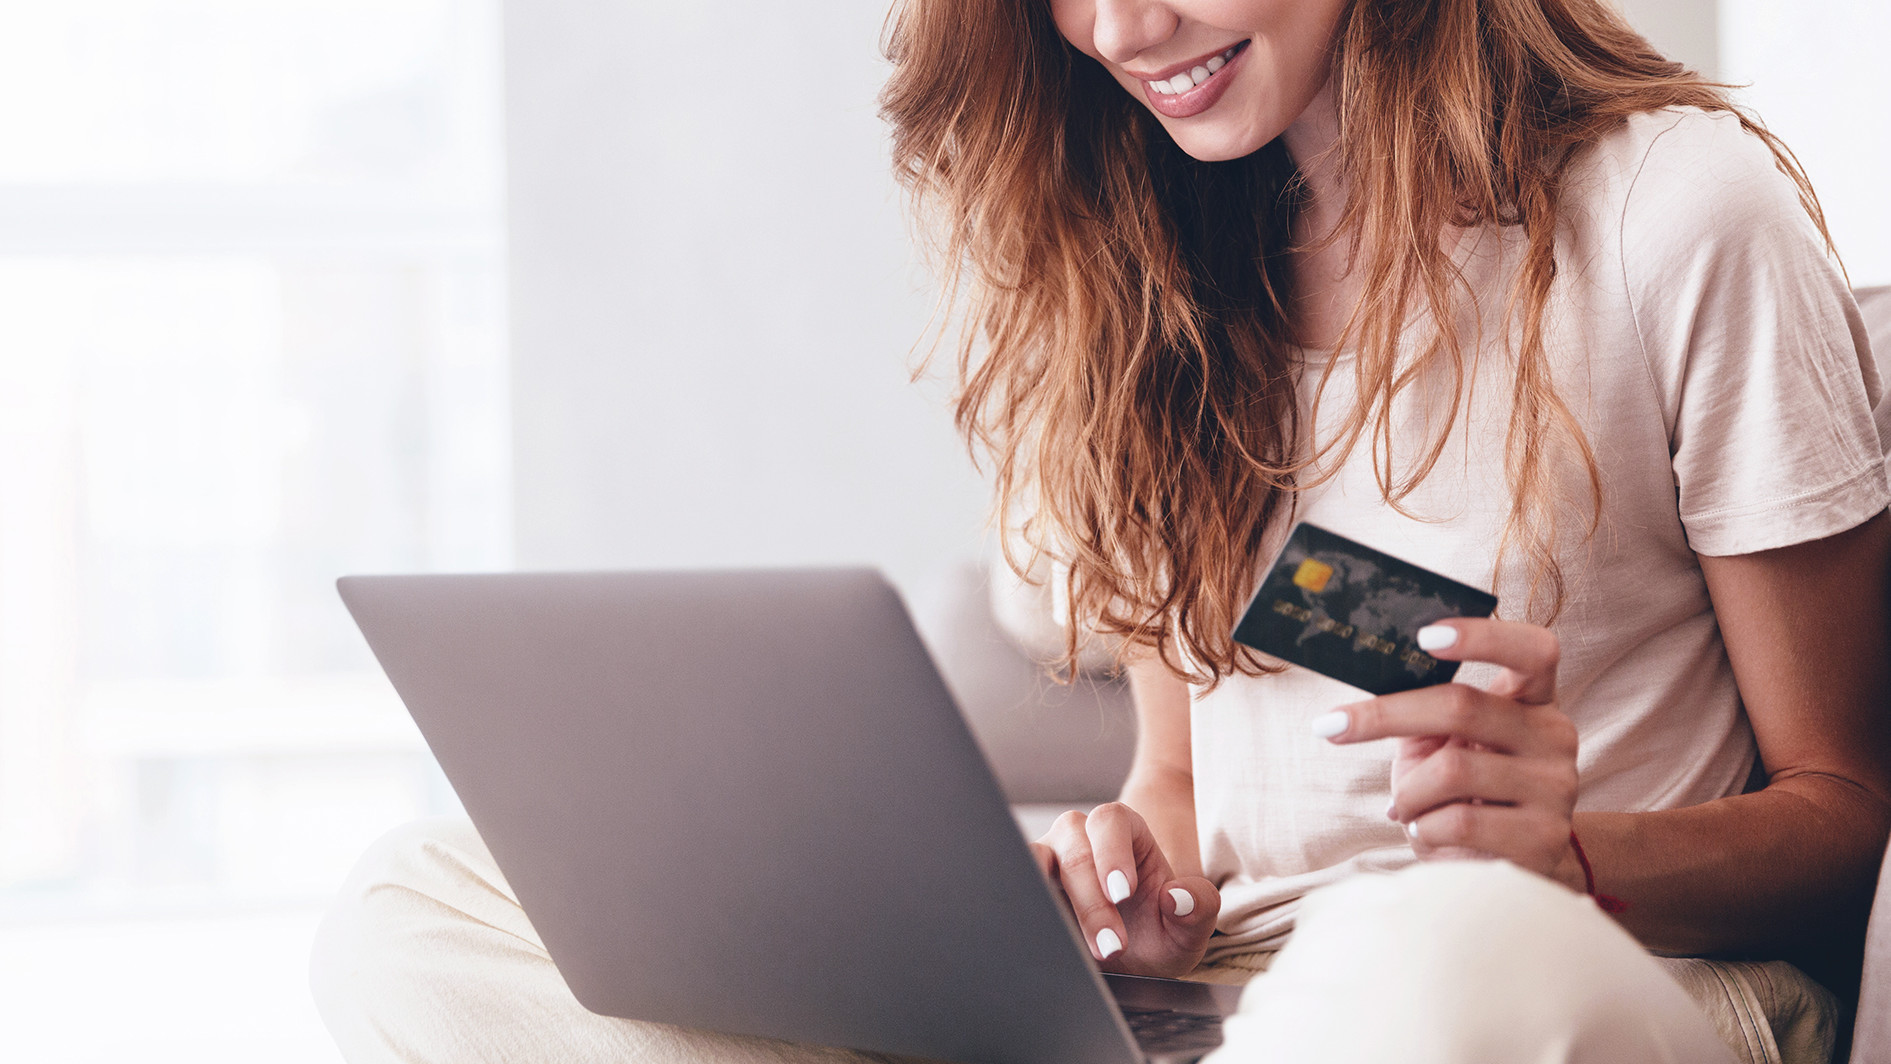 Woman proceeding to an online purchase, credit card in hand